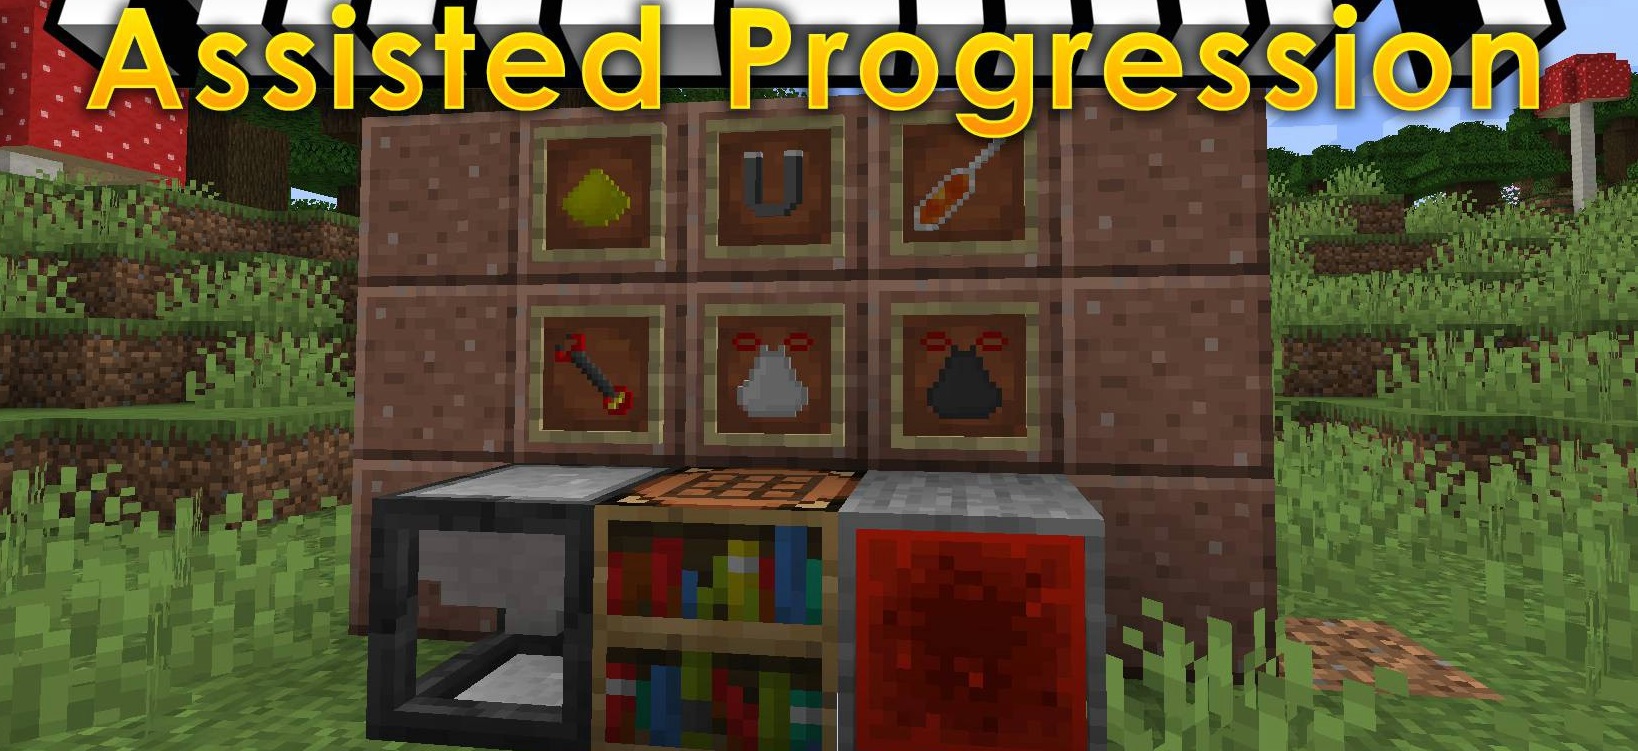 Assisted-Progression-mod-for-minecraft-logo